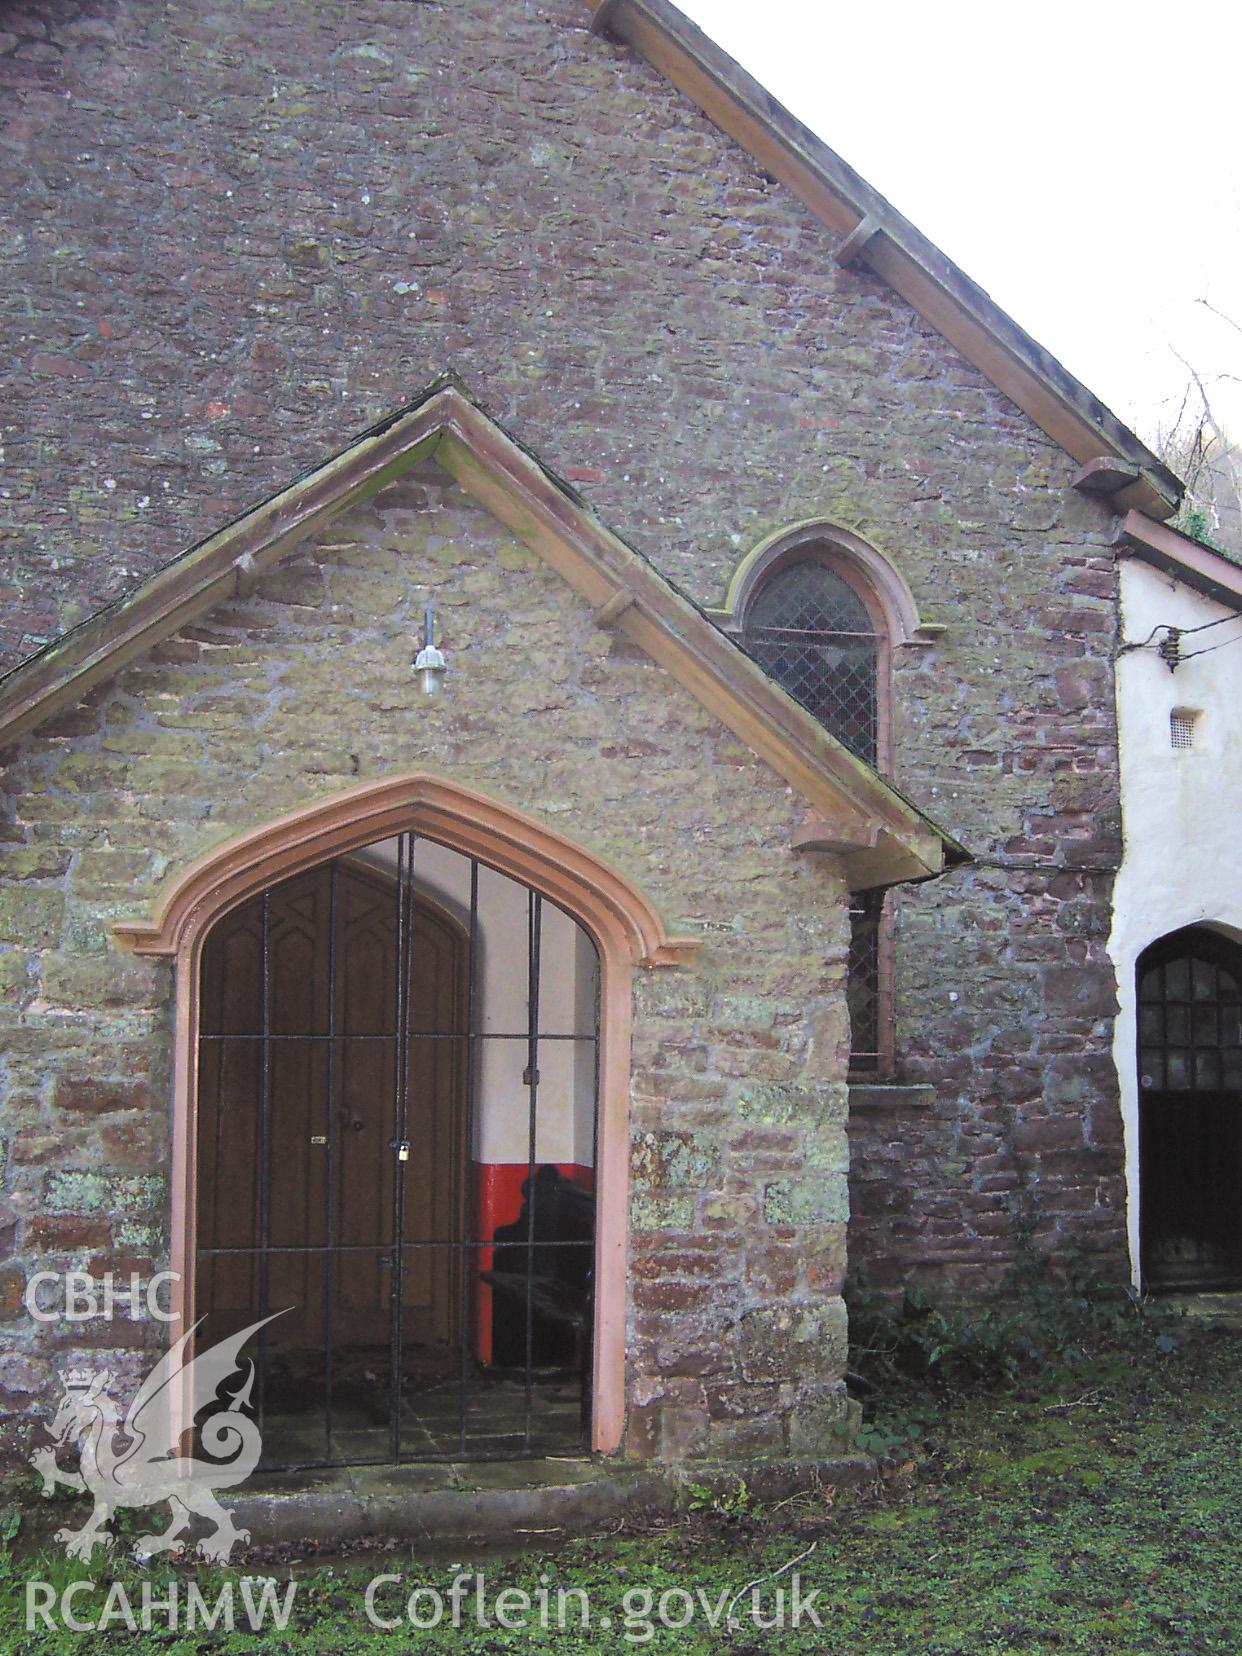 Colour digital photograph showing the front of the church exterior.